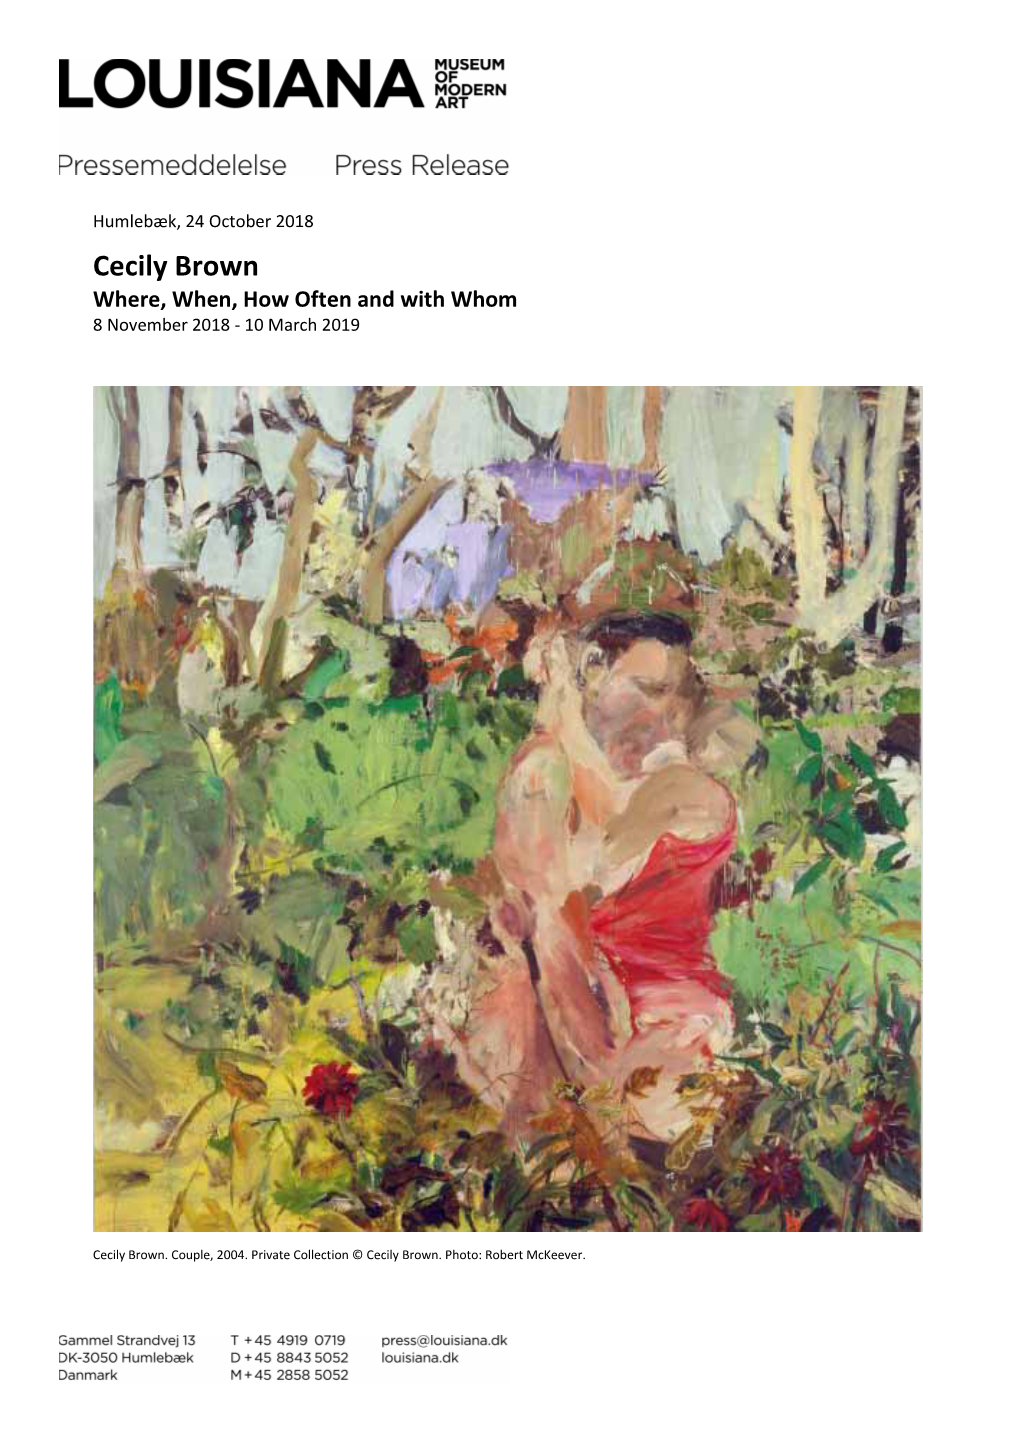 Cecily Brown Where, When, How Often and with Whom 8 November 2018 - 10 March 2019